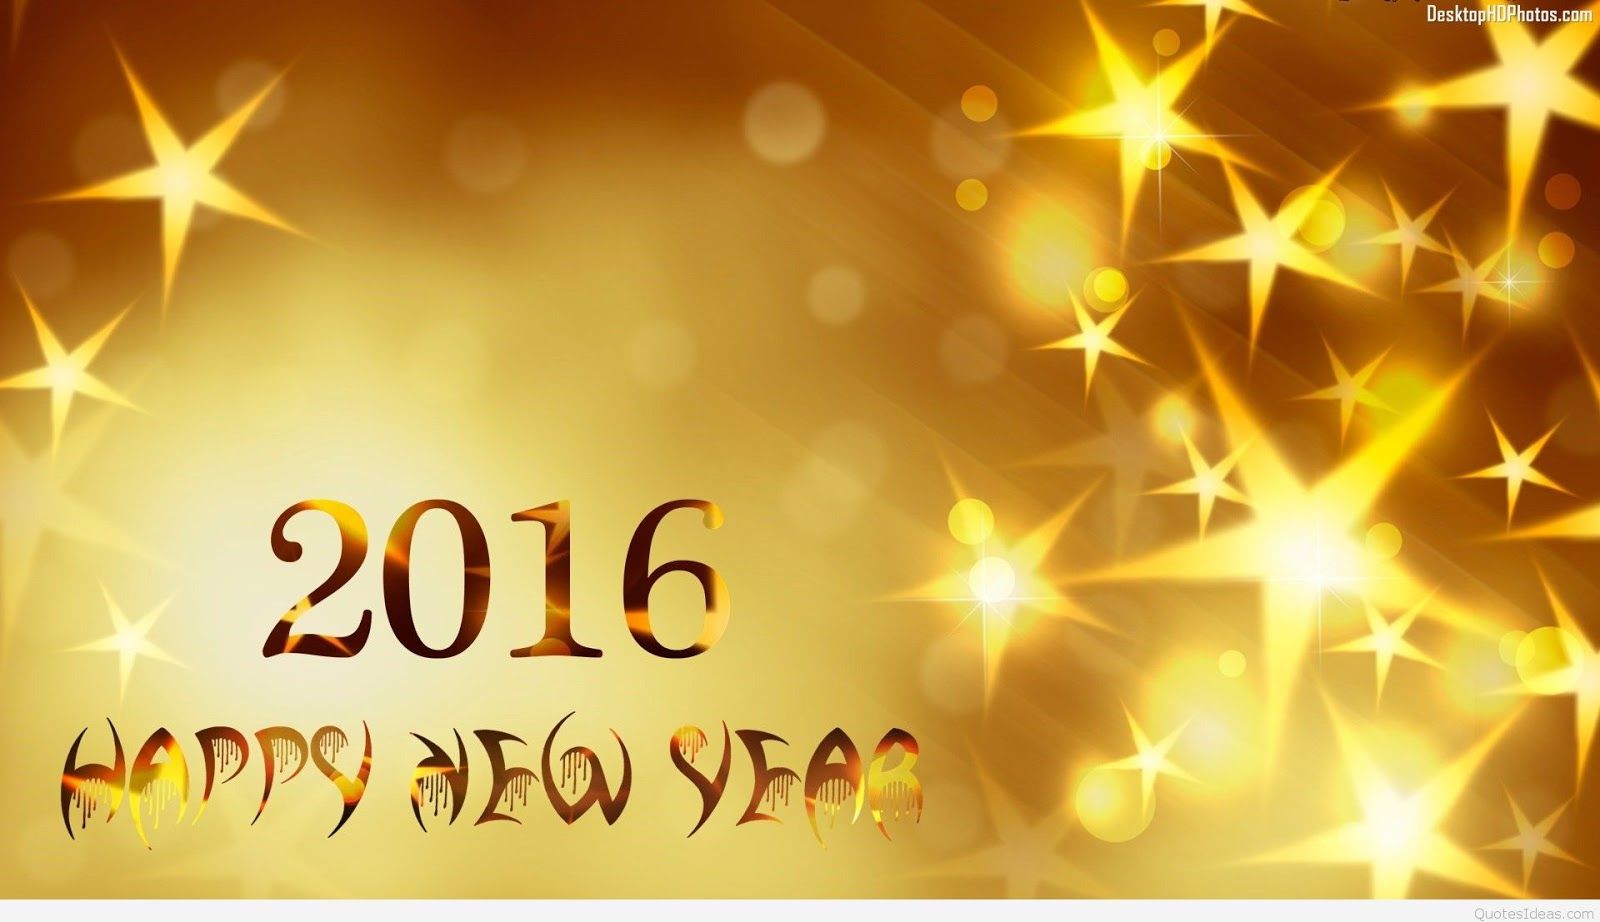 2016 Happy New Years Wallpaper Pictures Photos and 1600x922